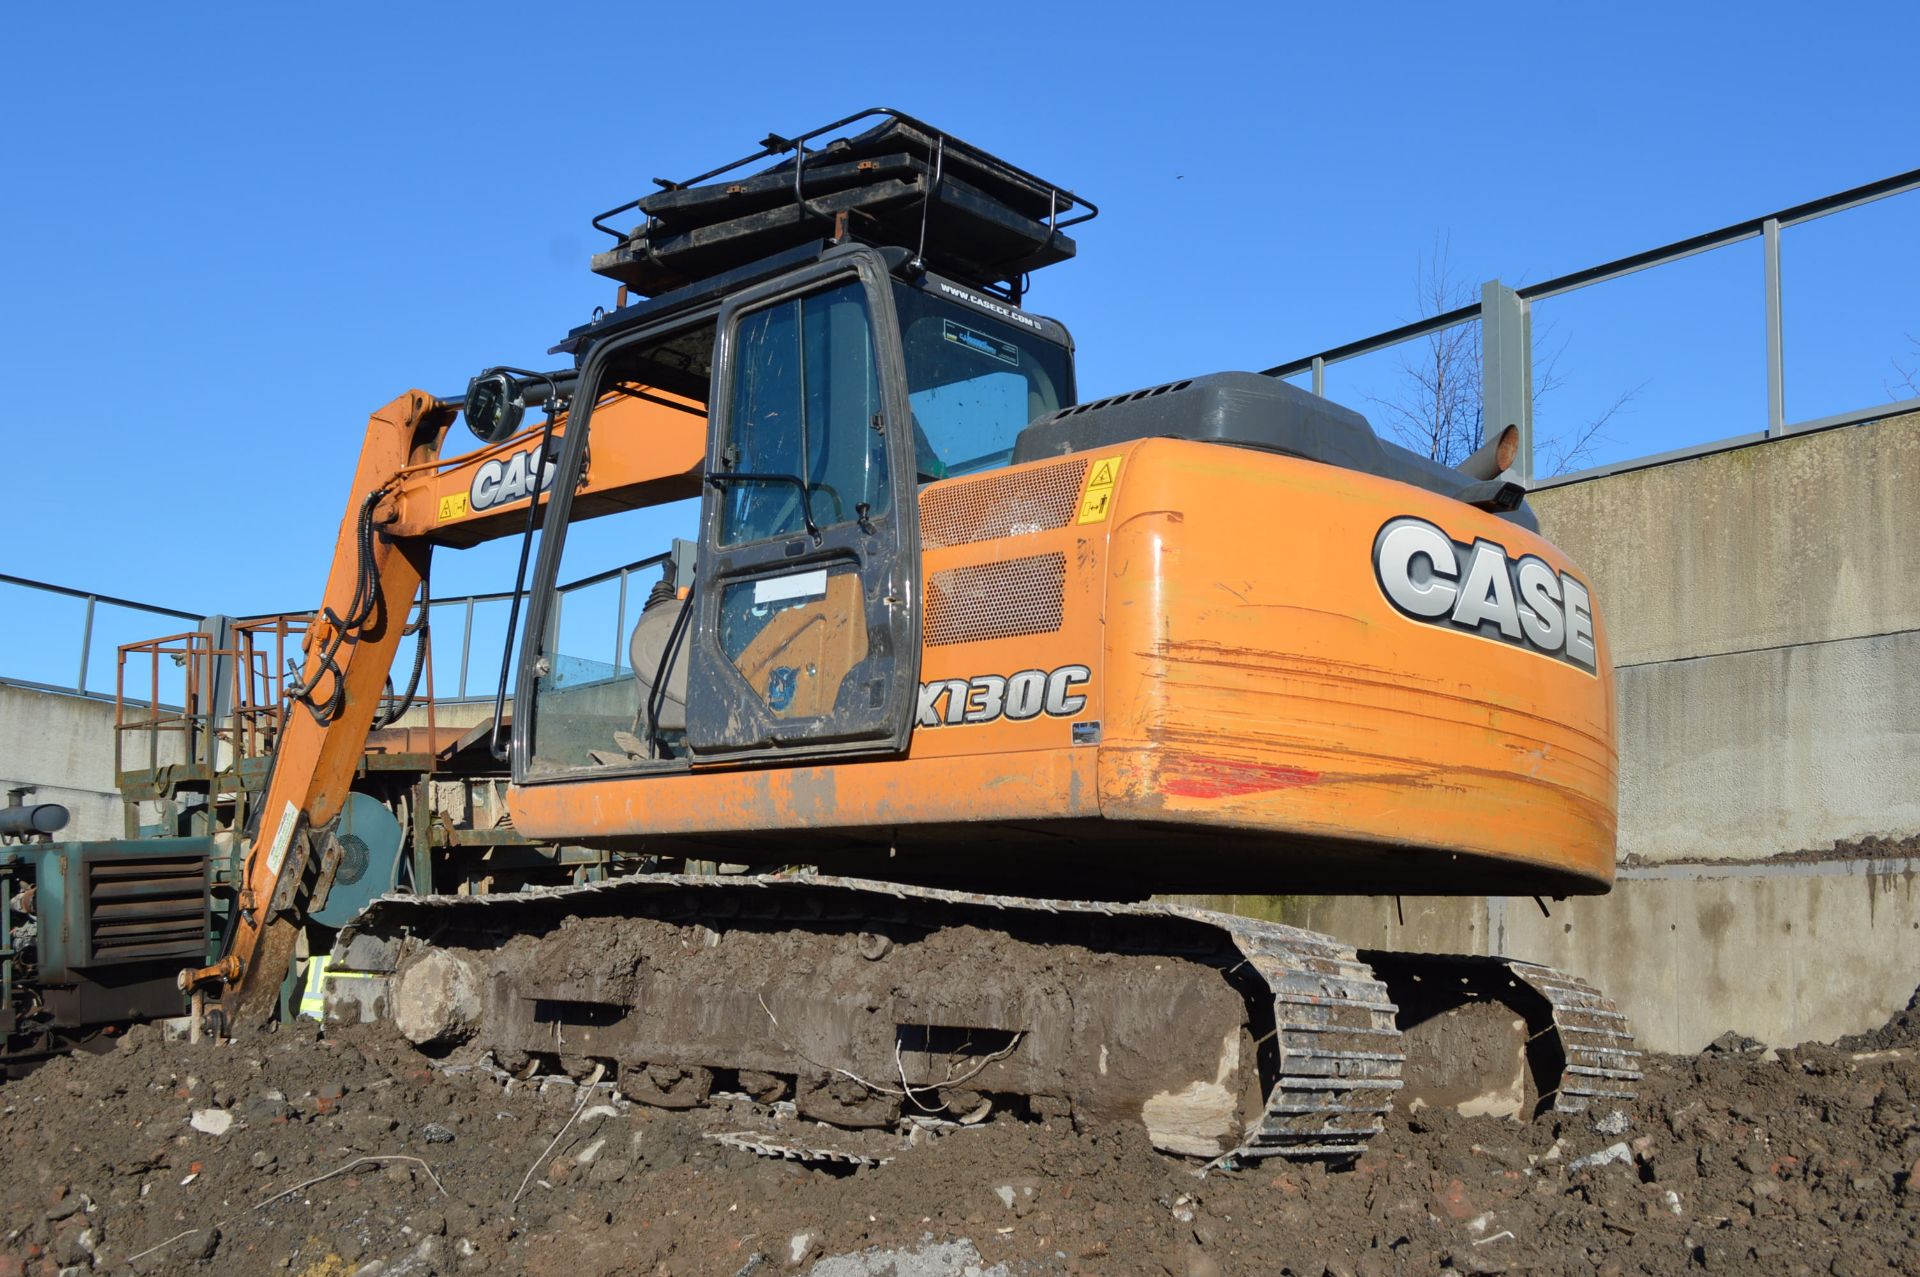 Case CX130C TRACKED EXCAVATOR, PIN DCH130R6NFF6D1430, year of manufacture 2014, 13900kg operating - Image 2 of 3